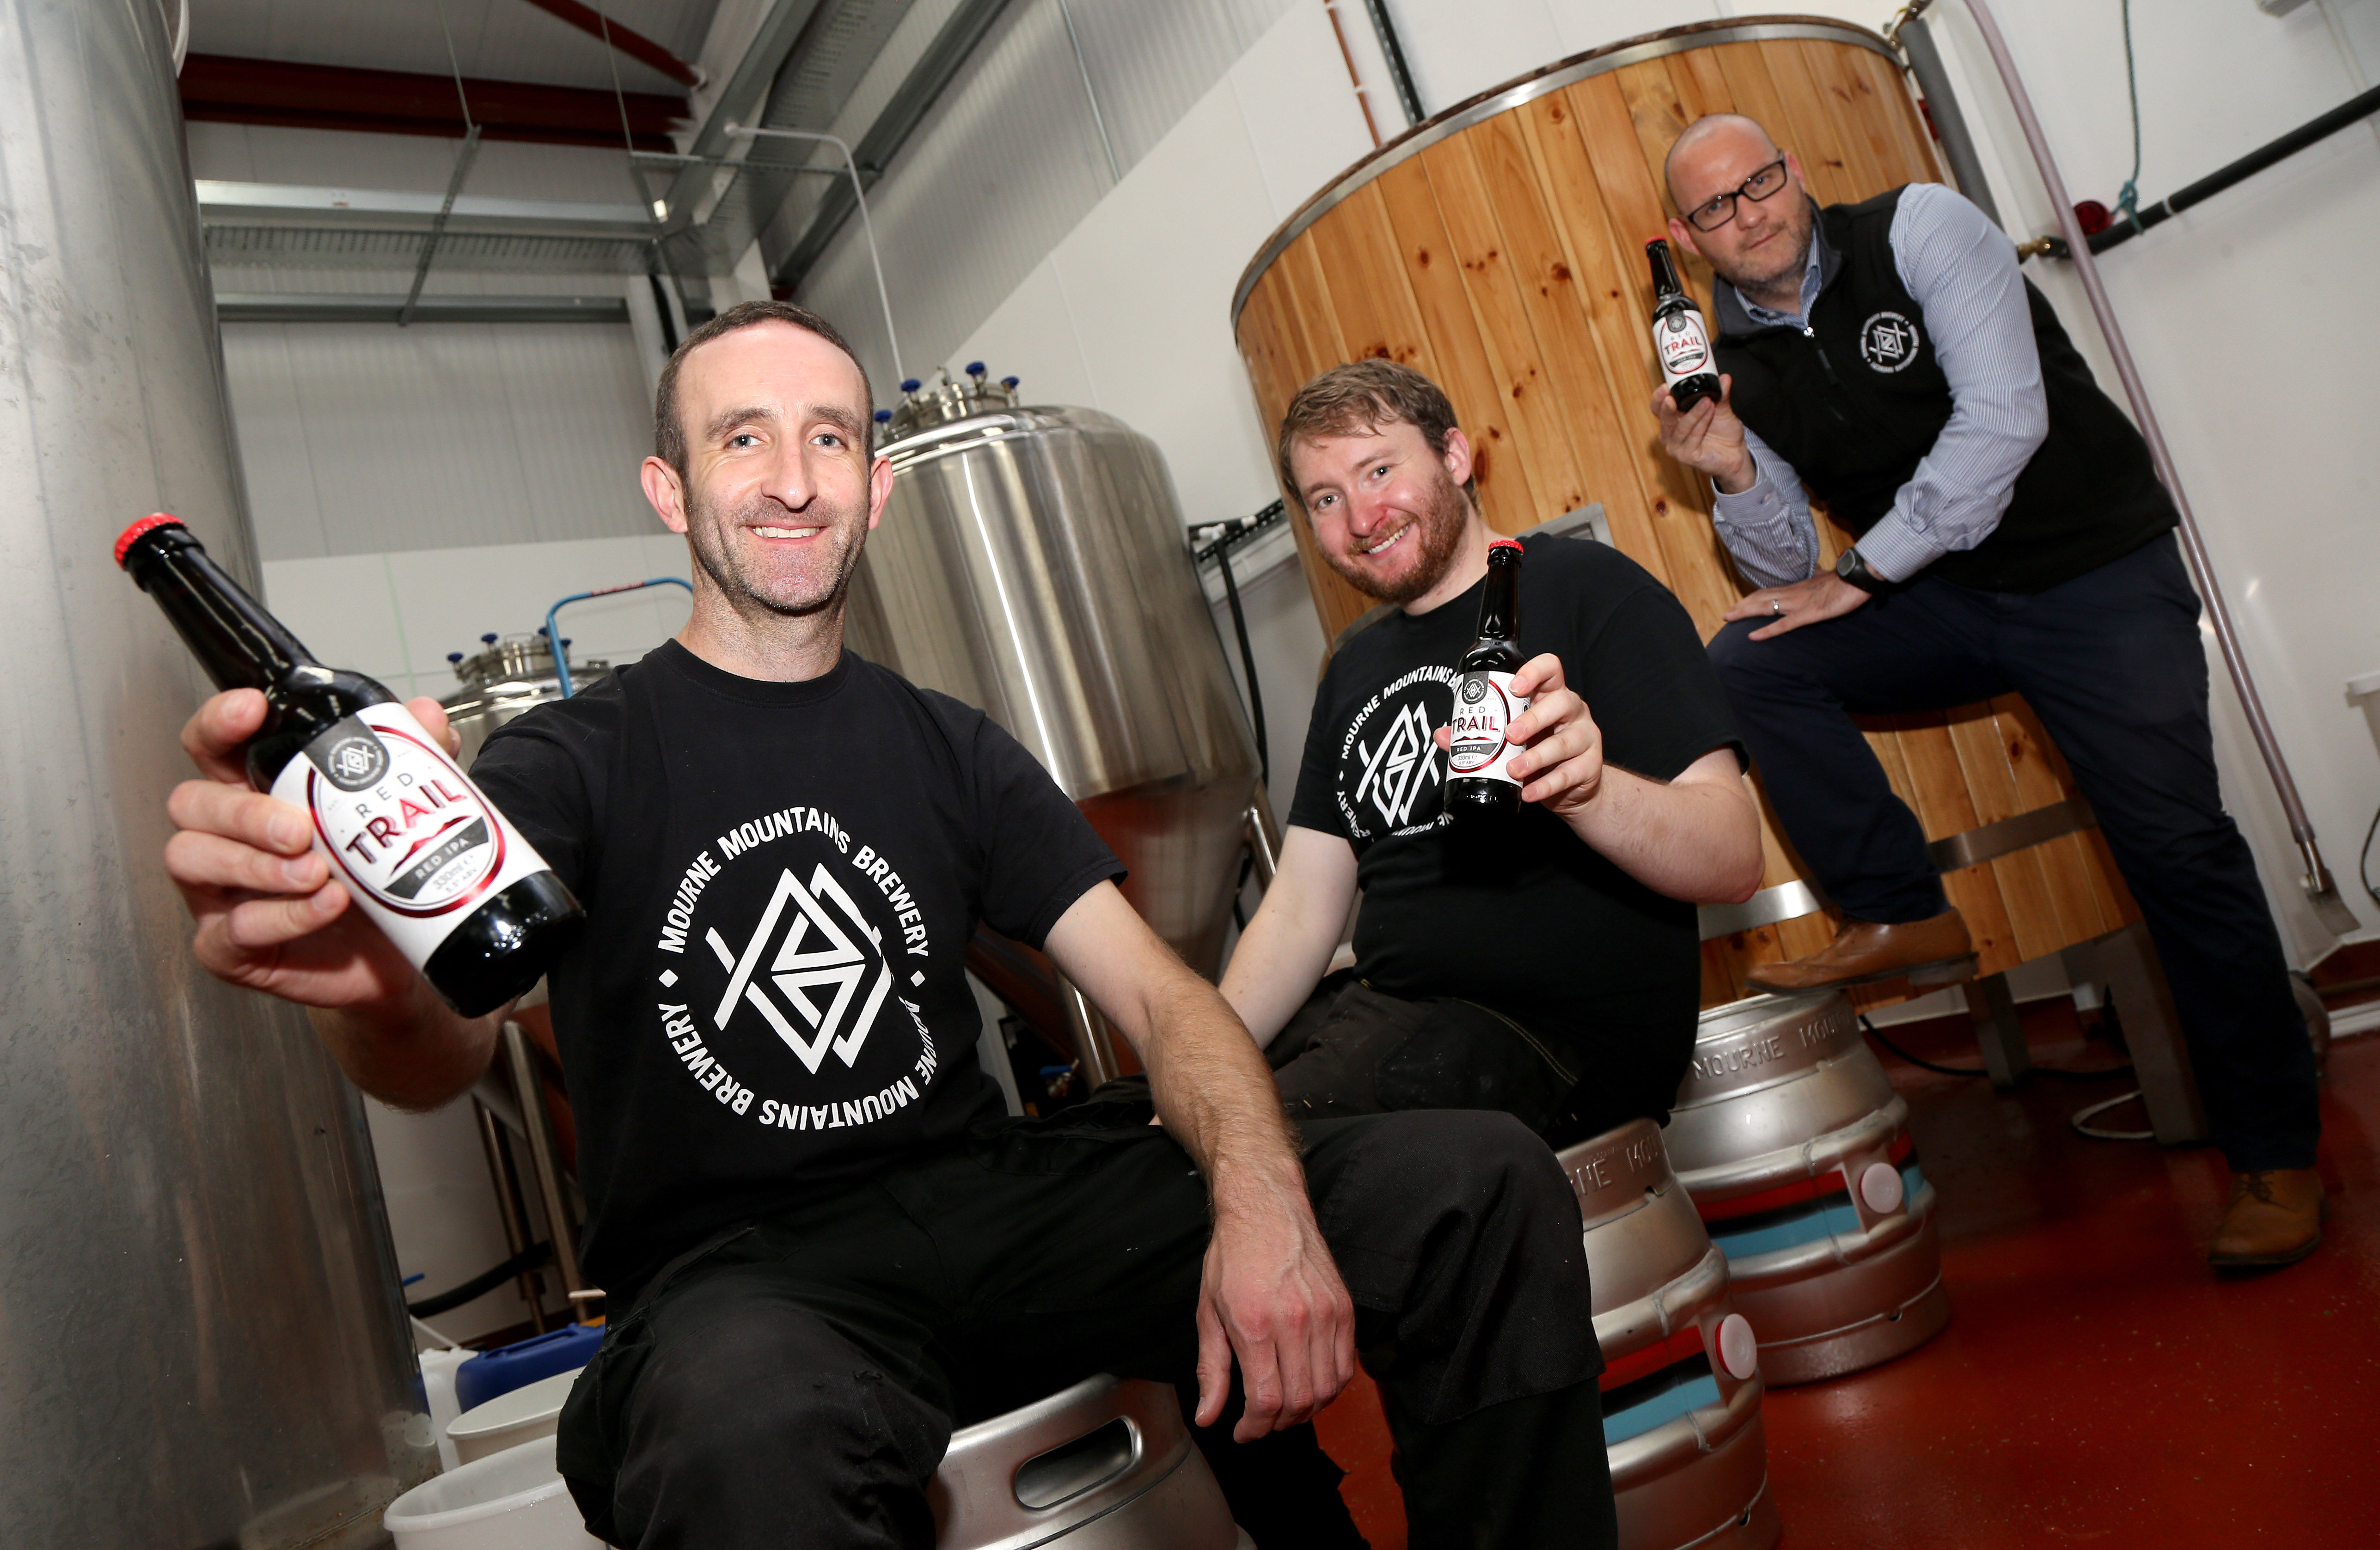 “Cheers!” to Mourne Mountains Brewery as Red IPA wins two Great Taste stars